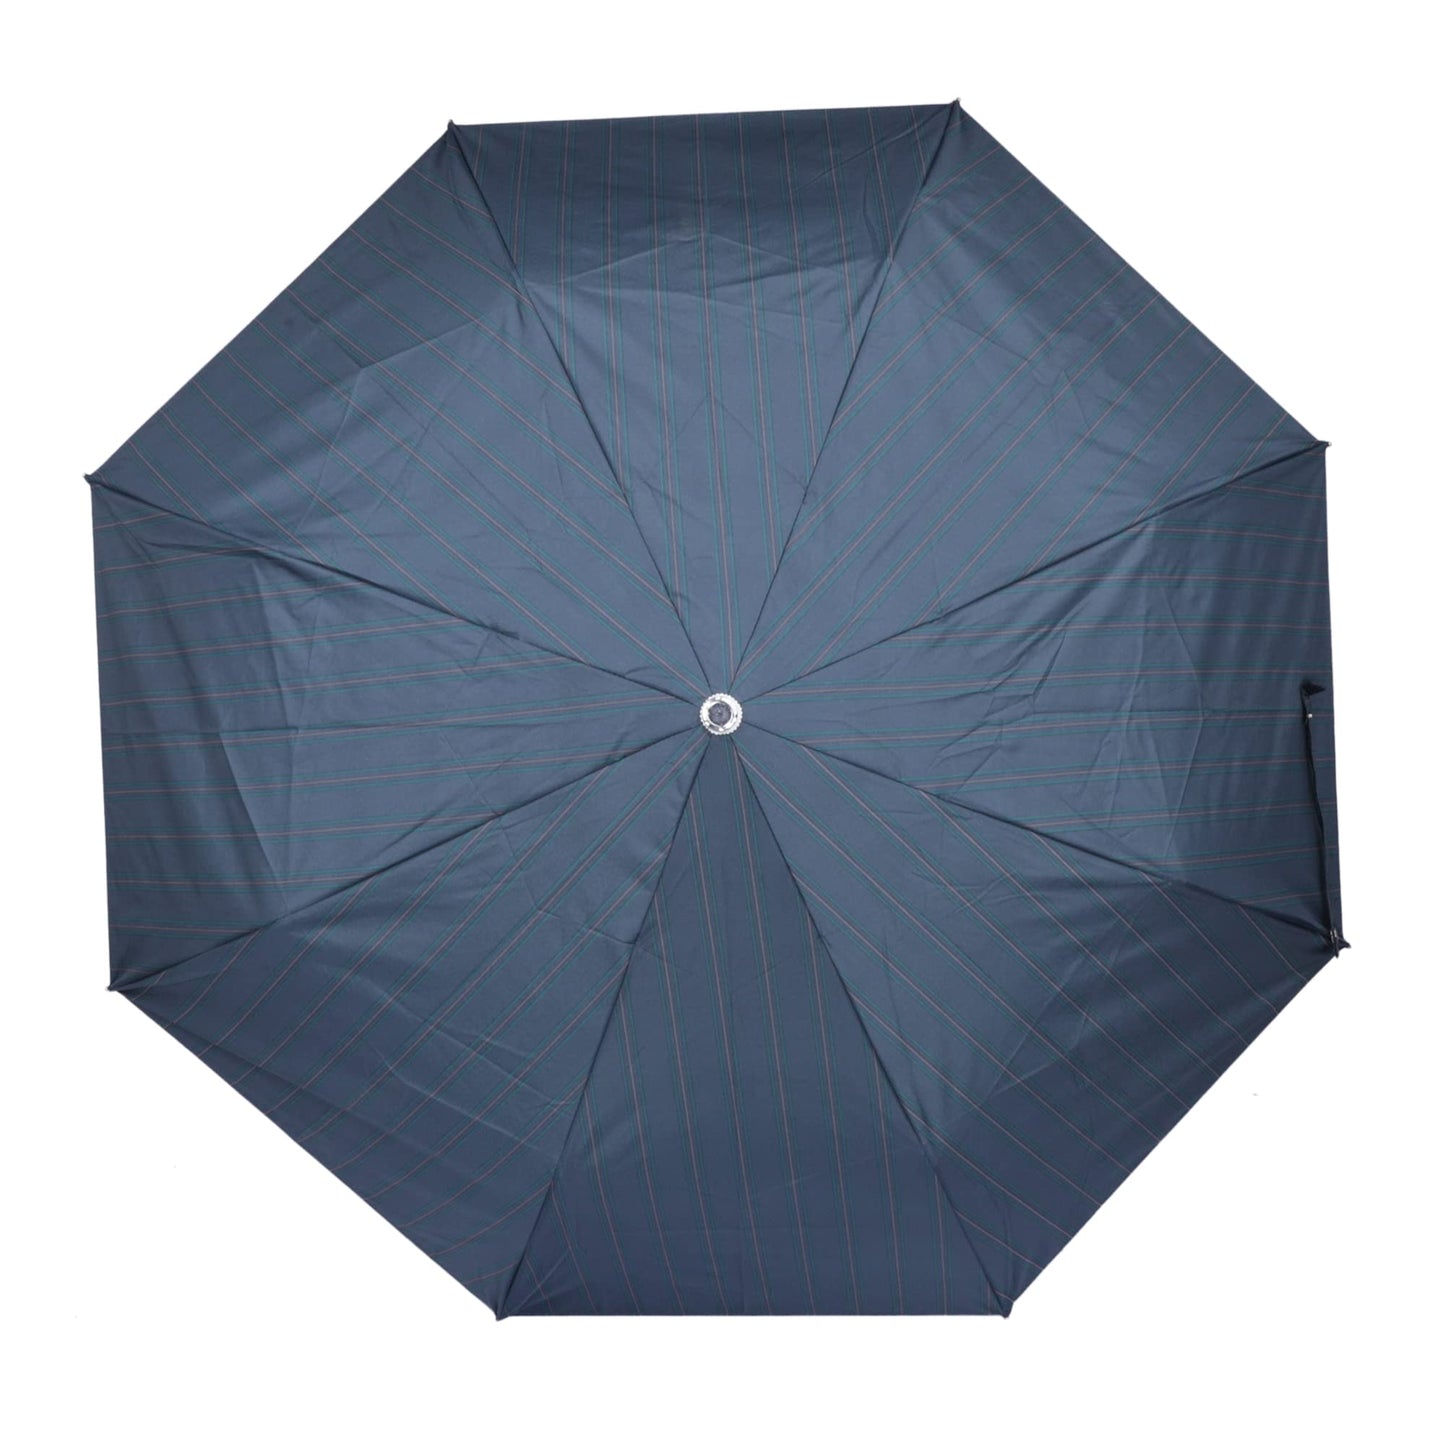 THE CLOWNFISH Umbrella 3 Fold Auto Open Waterproof 190 T Polyester Double Coated Silver Lined Umbrellas For Men and Women (Printed Design- Dark Blue)